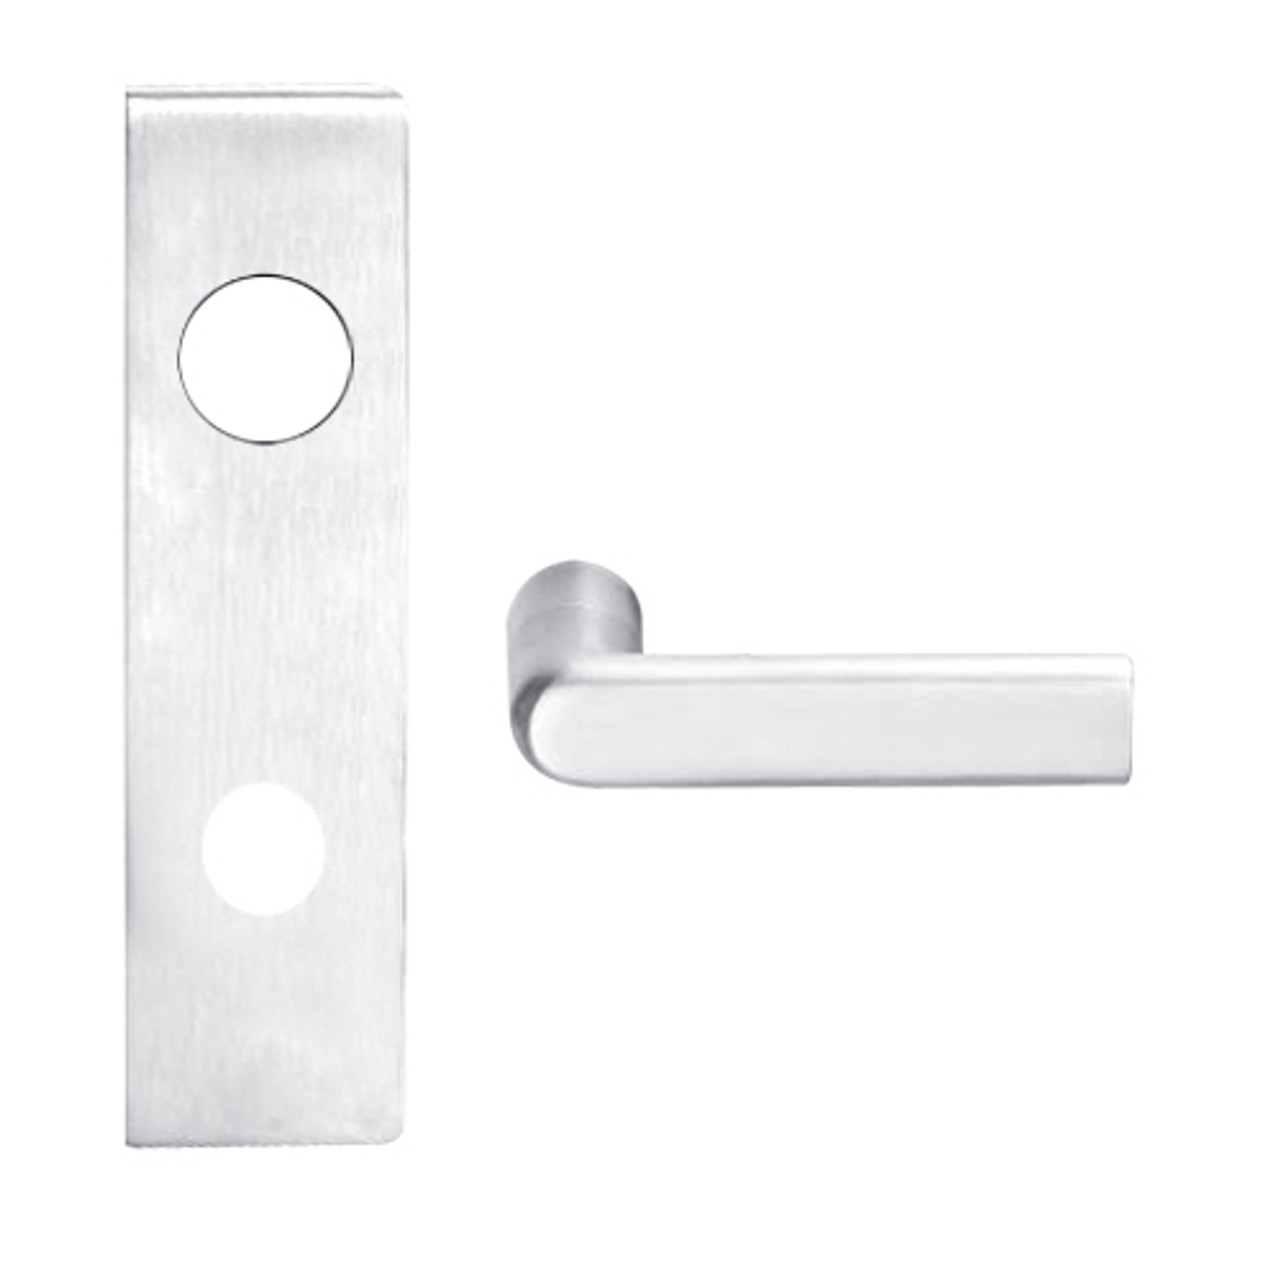 L9456R-01N-625 Schlage L Series Corridor with Deadbolt Commercial Mortise Lock with 01 Cast Lever Design and Full Size Core in Bright Chrome